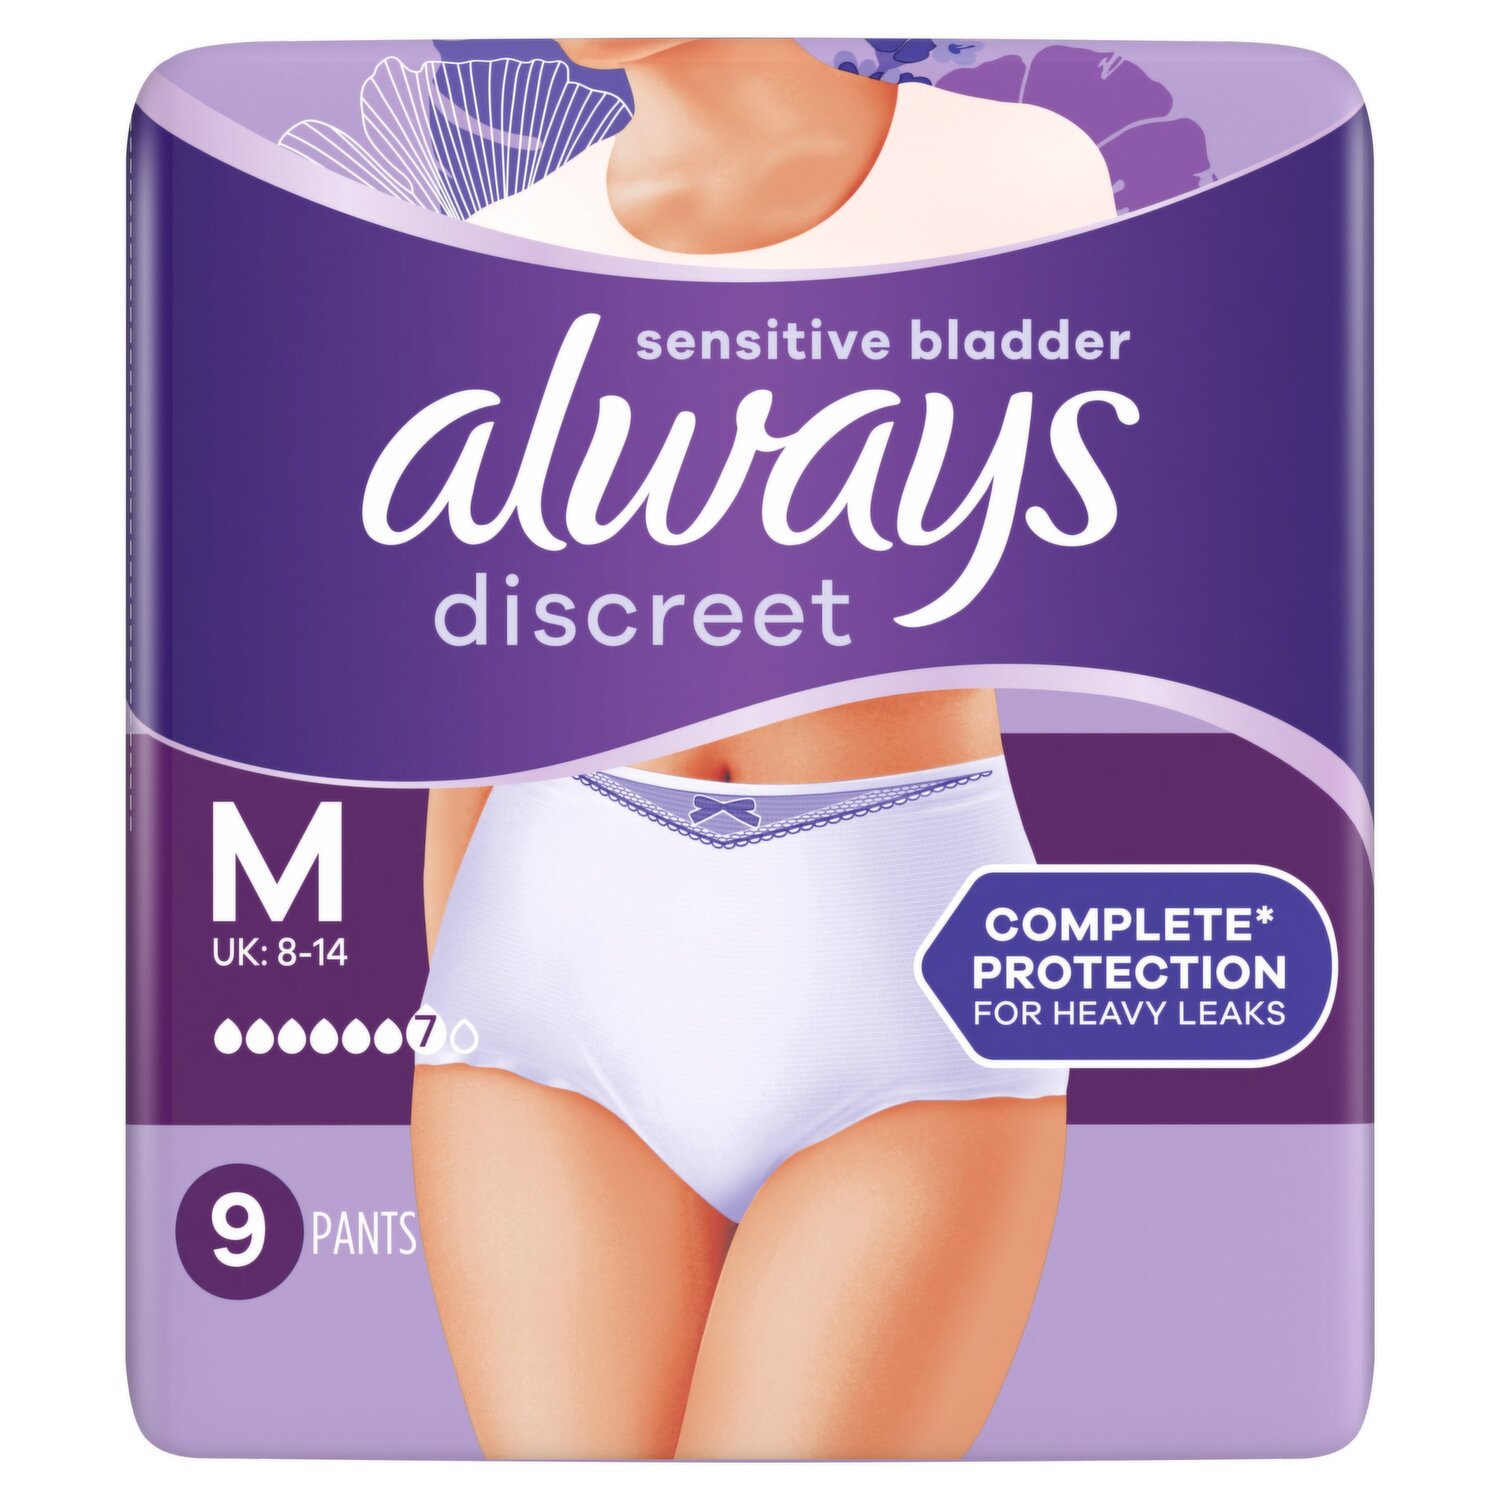 TENA Silhouette Blanc Low Waist Incontinence Pants, Incontinence & Bladder